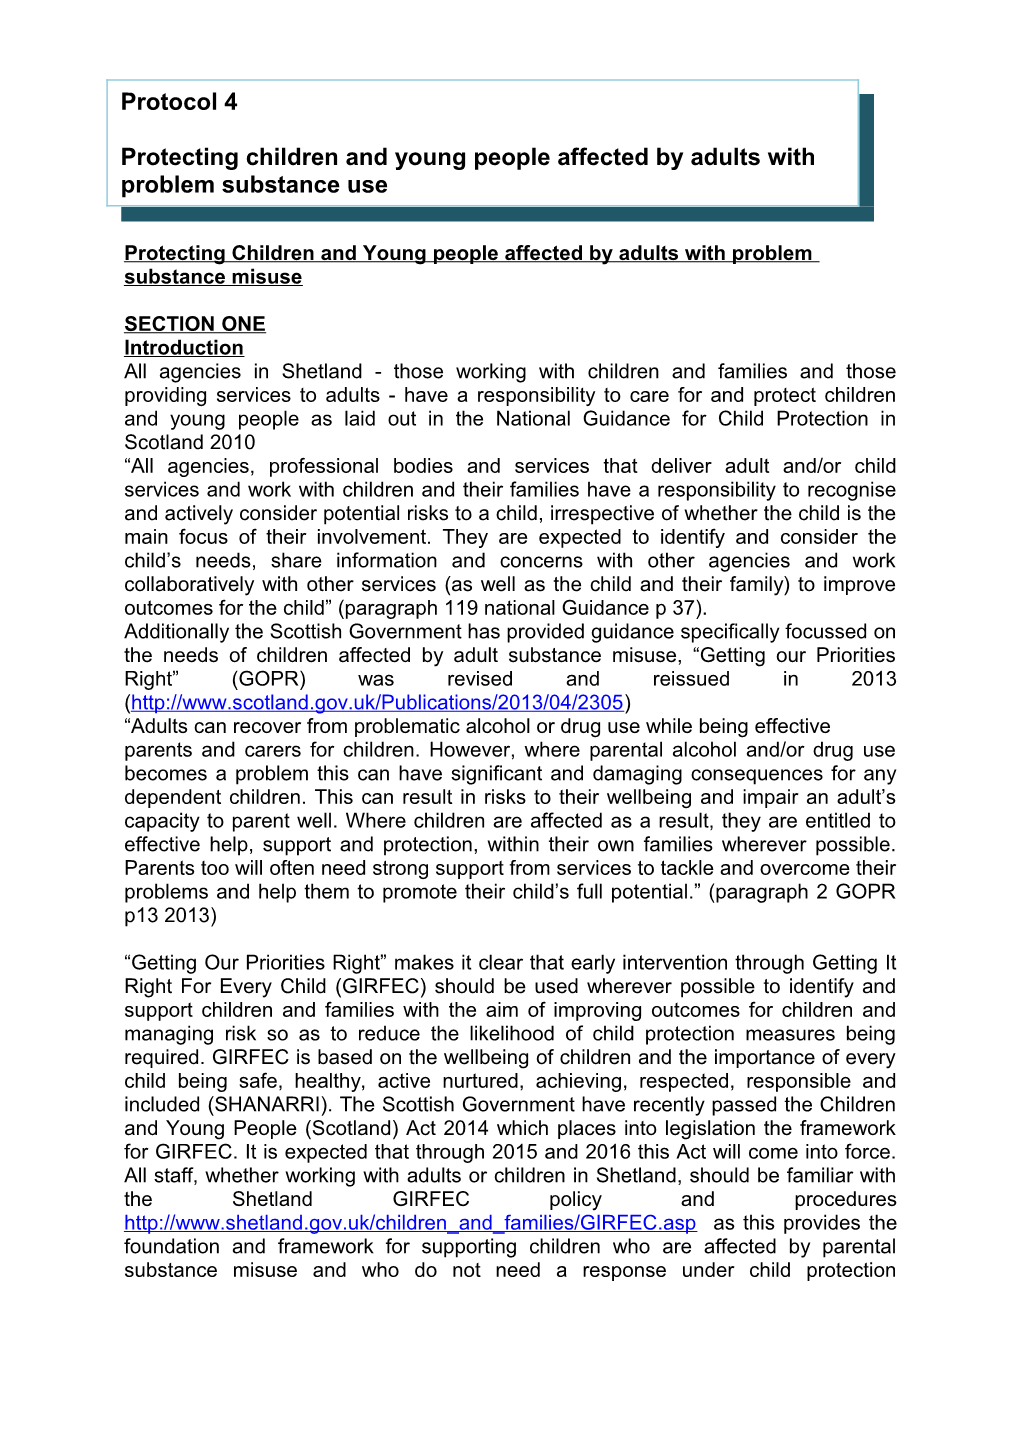 Protecting Children and Young People Affected by Adults with Problem Substance Misuse